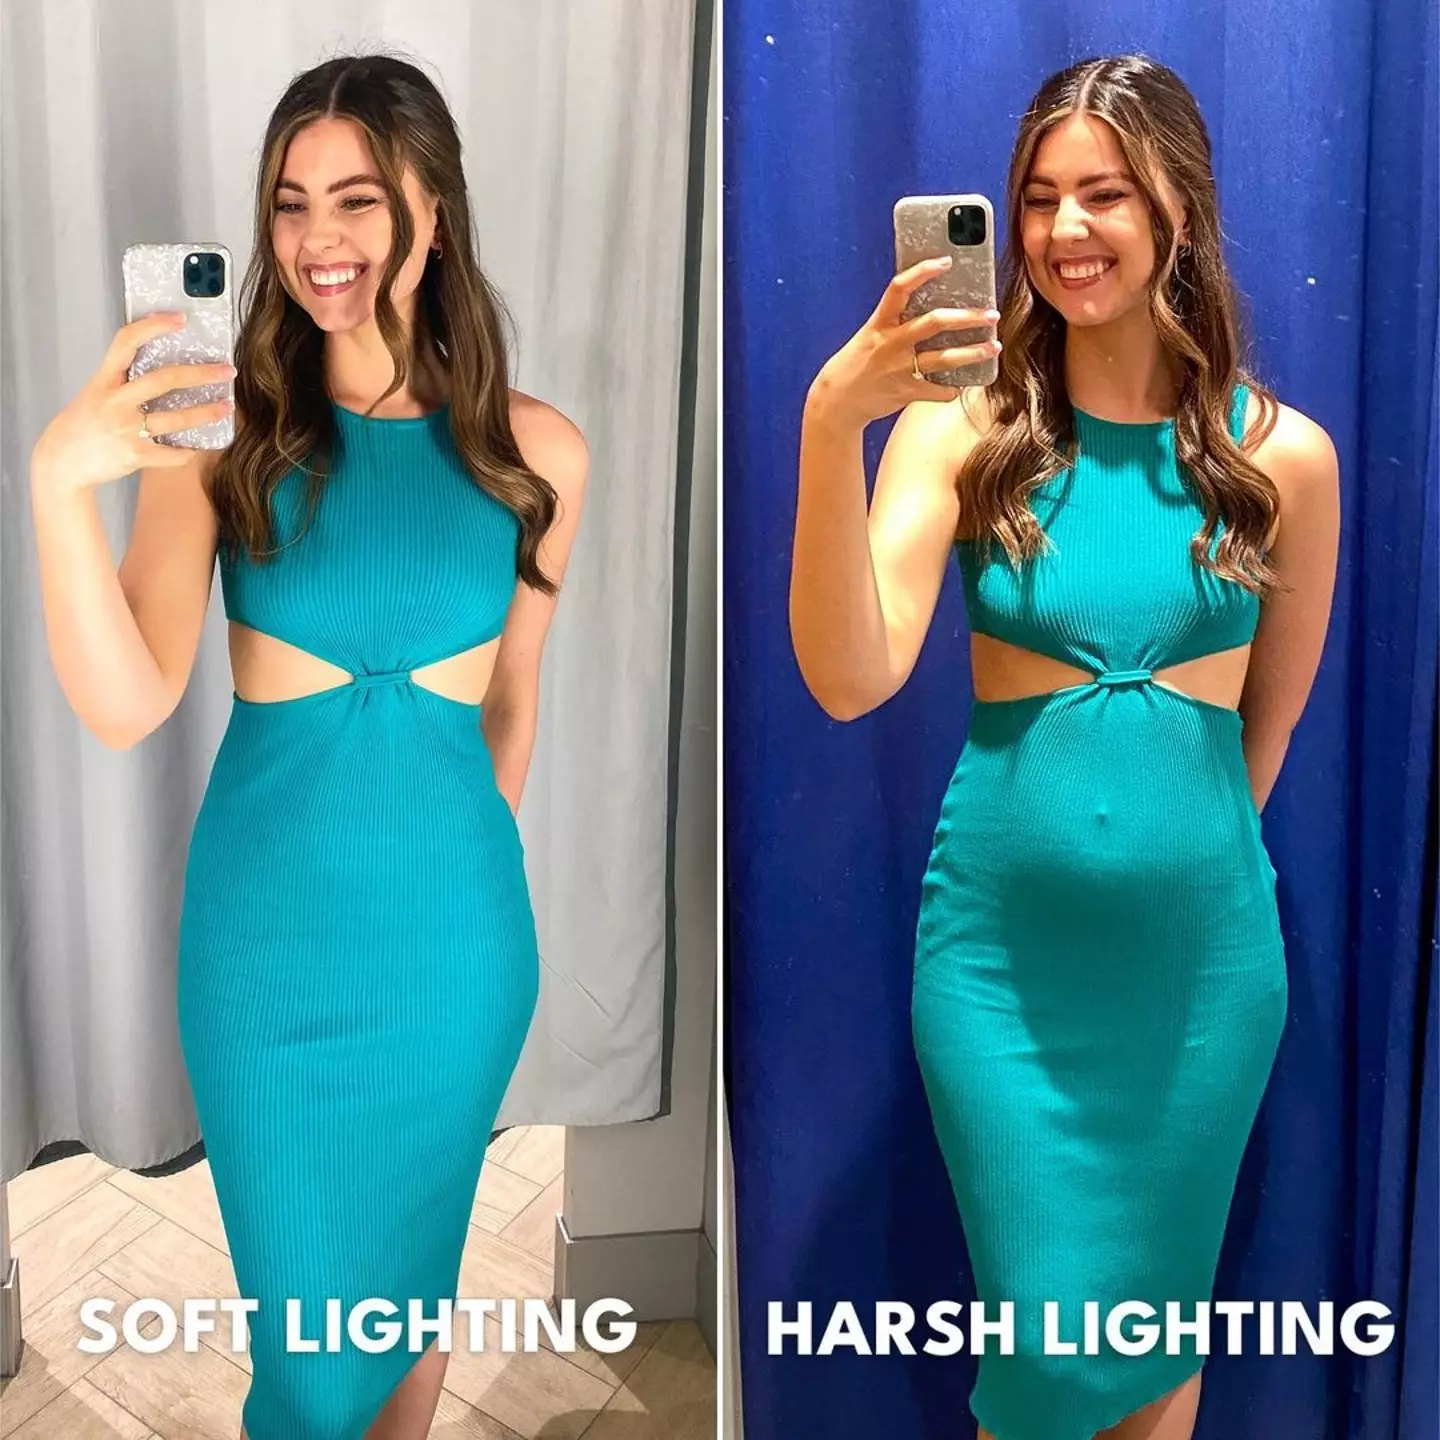 Bree tested the same outfit in different fitting rooms.